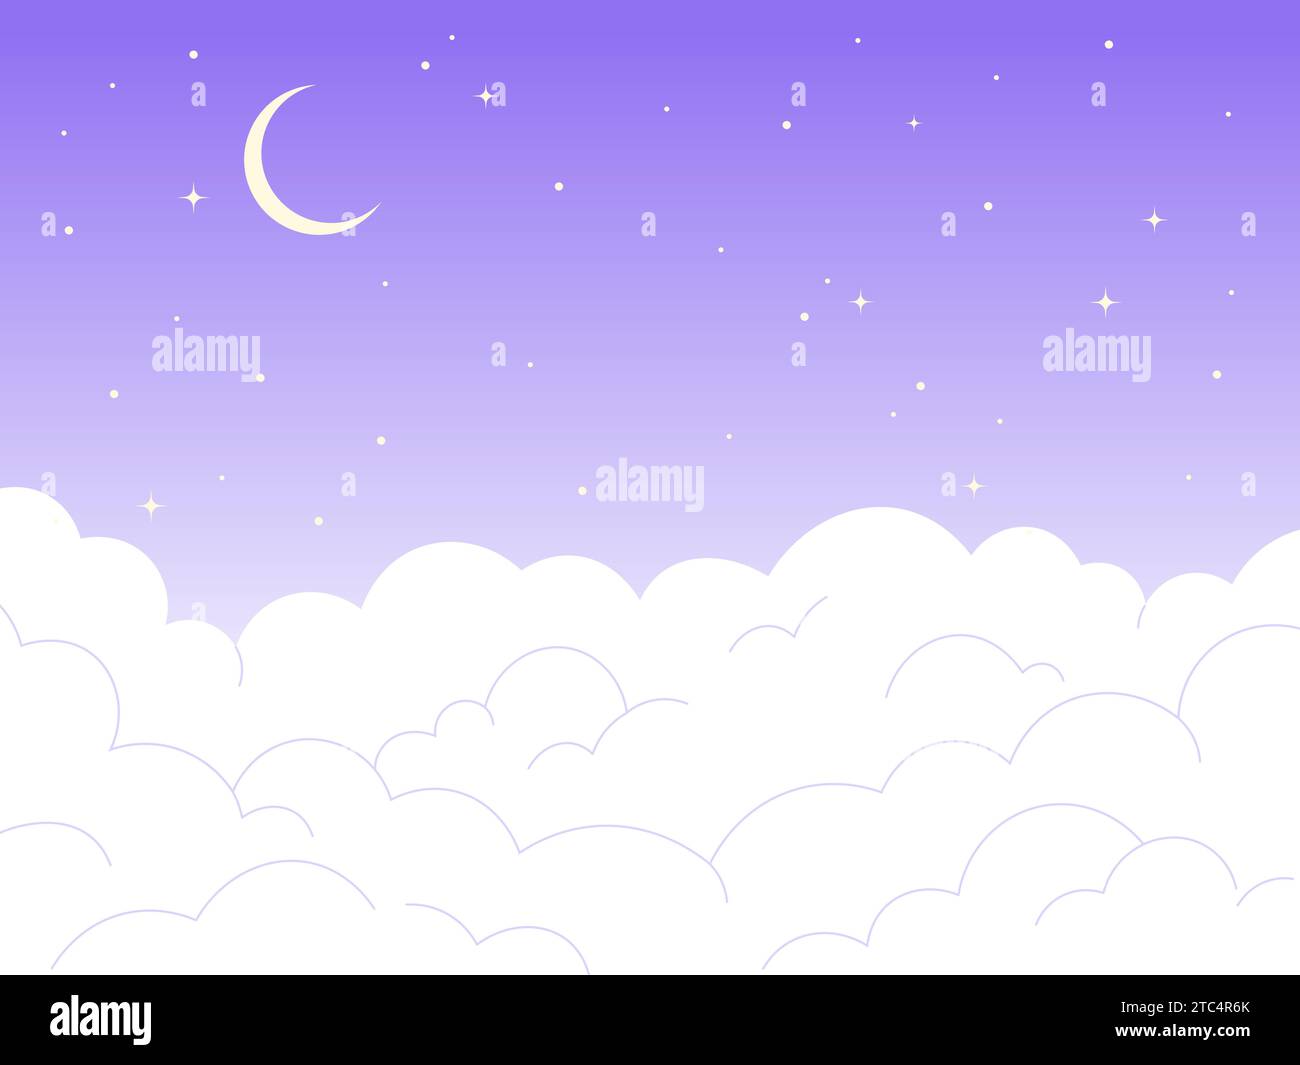 Night sky cartoon background. Evening landscape with crescent, shiny stars and clouds. Flat white cloud and moon, nature vector illustration Stock Vector